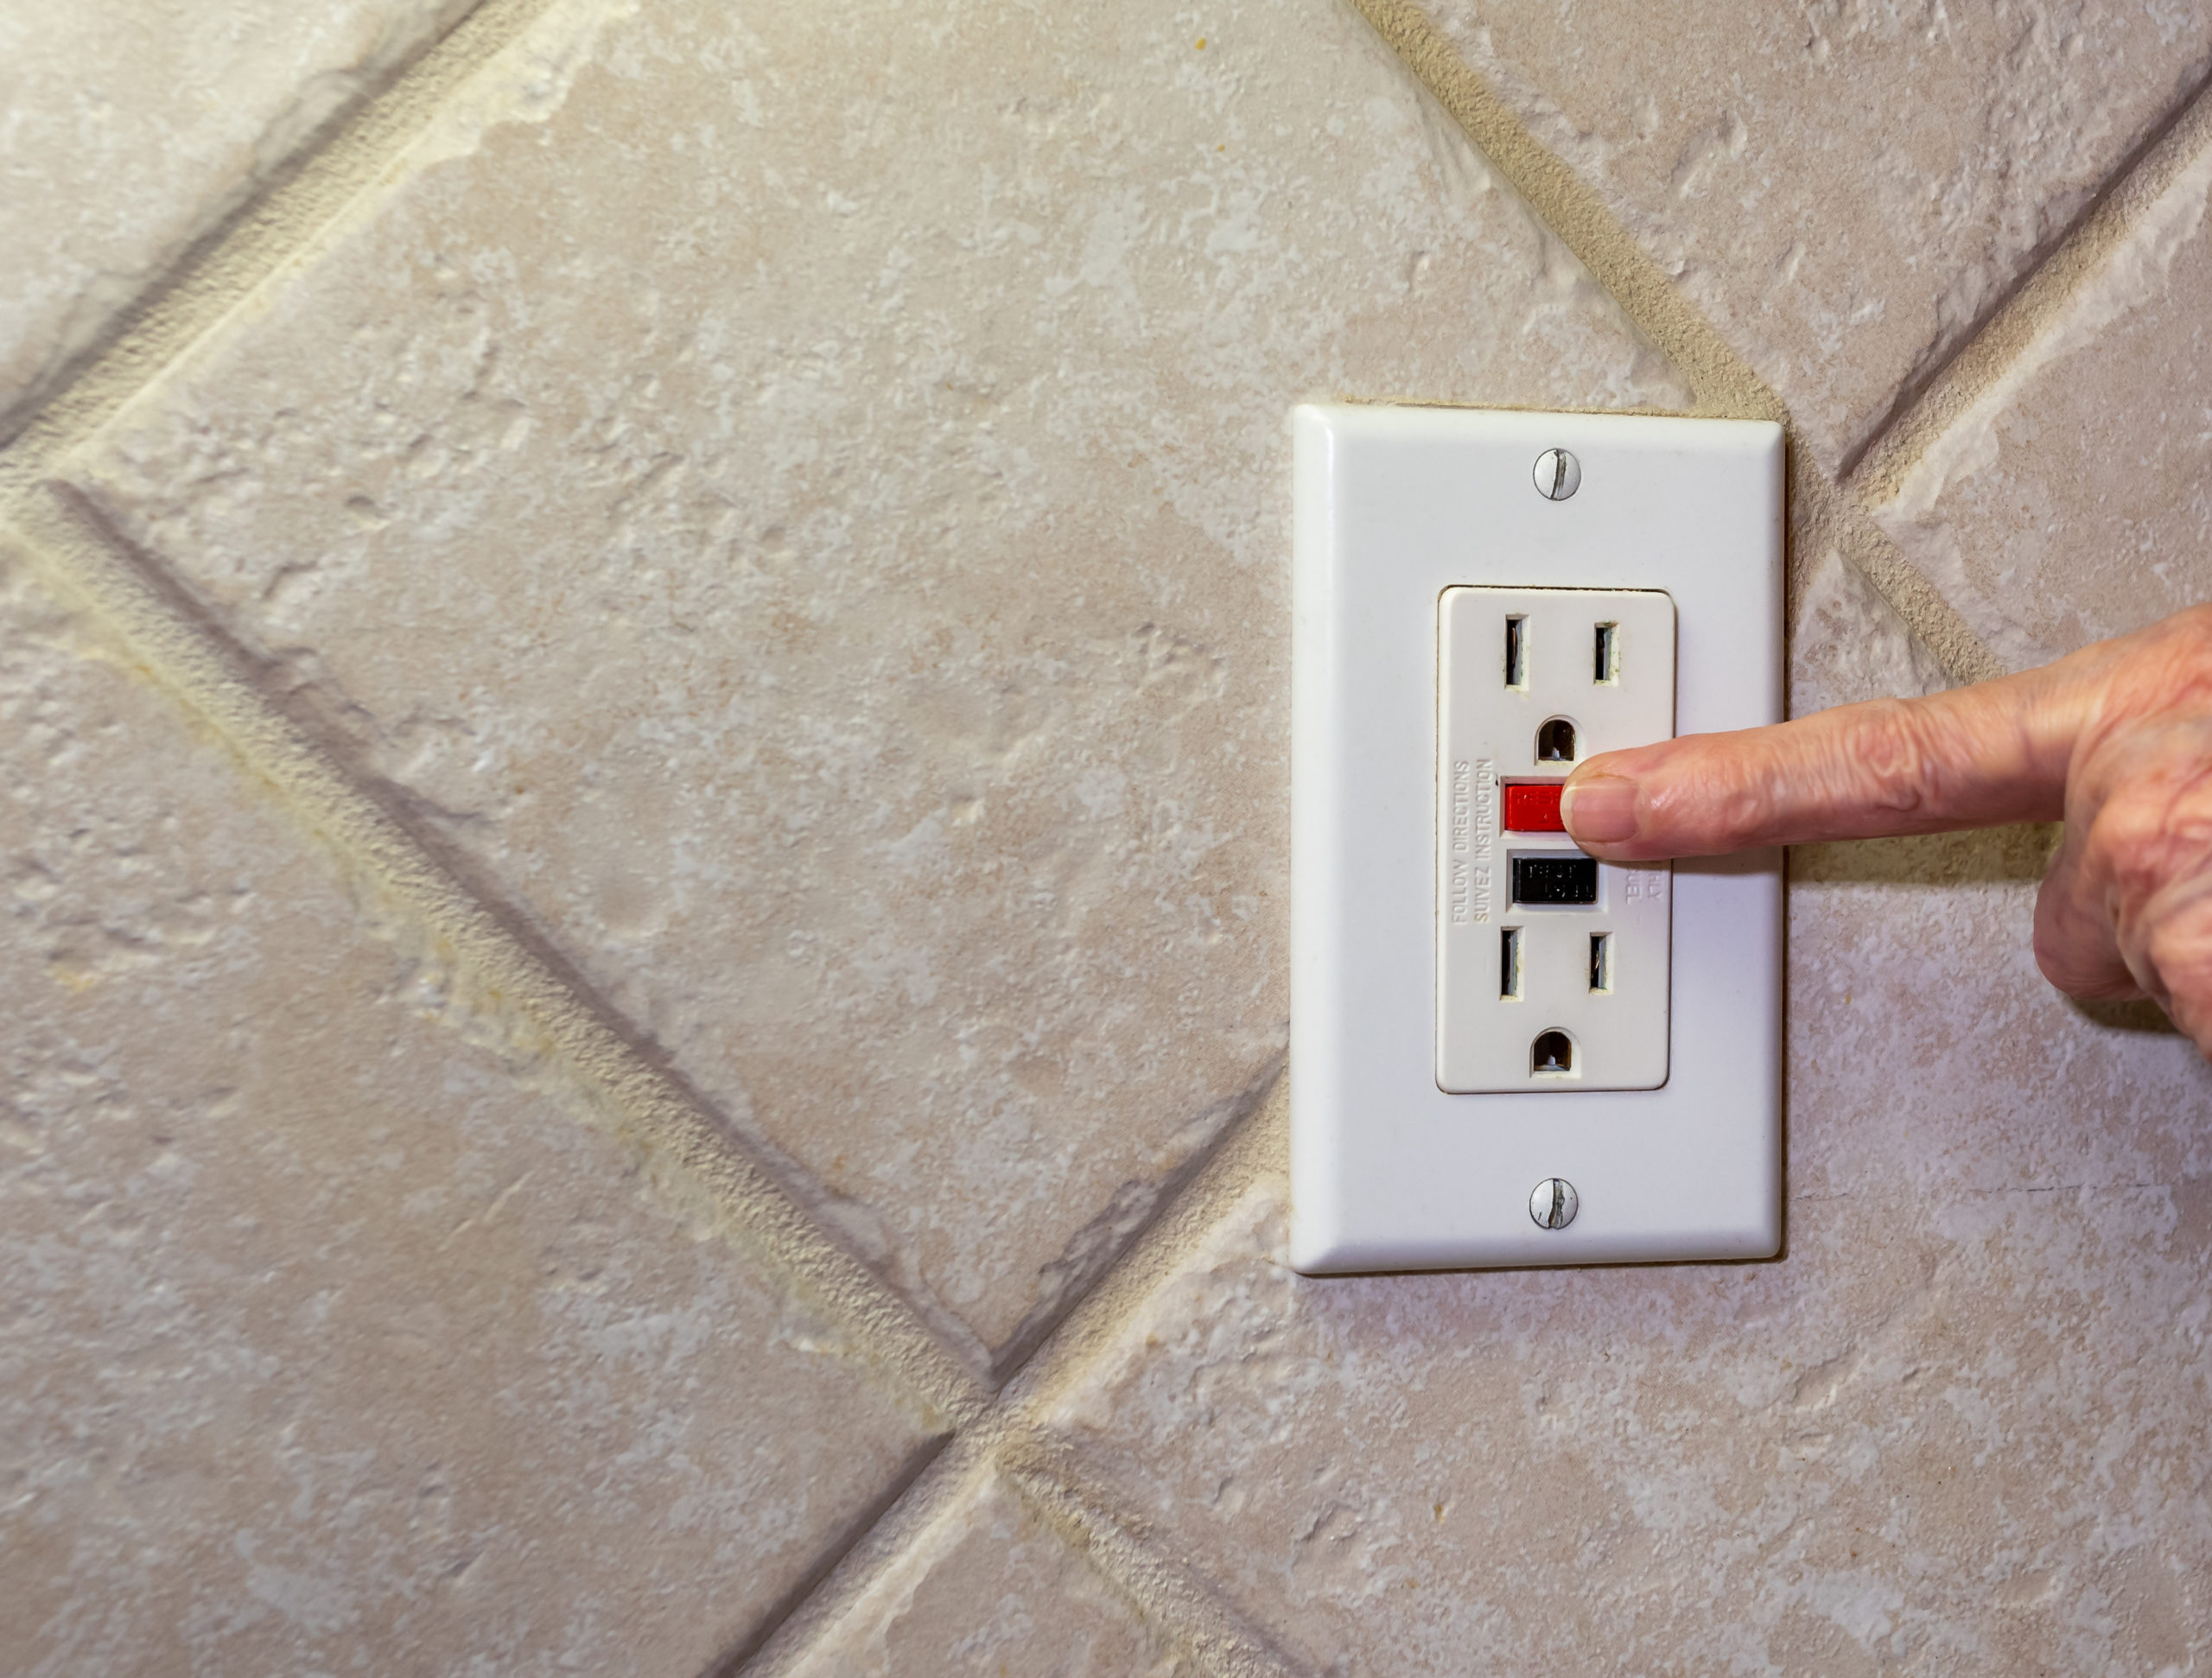 Outlets in the kitchen, bath, garage, basement, or other wet locations should be GFCI equipped